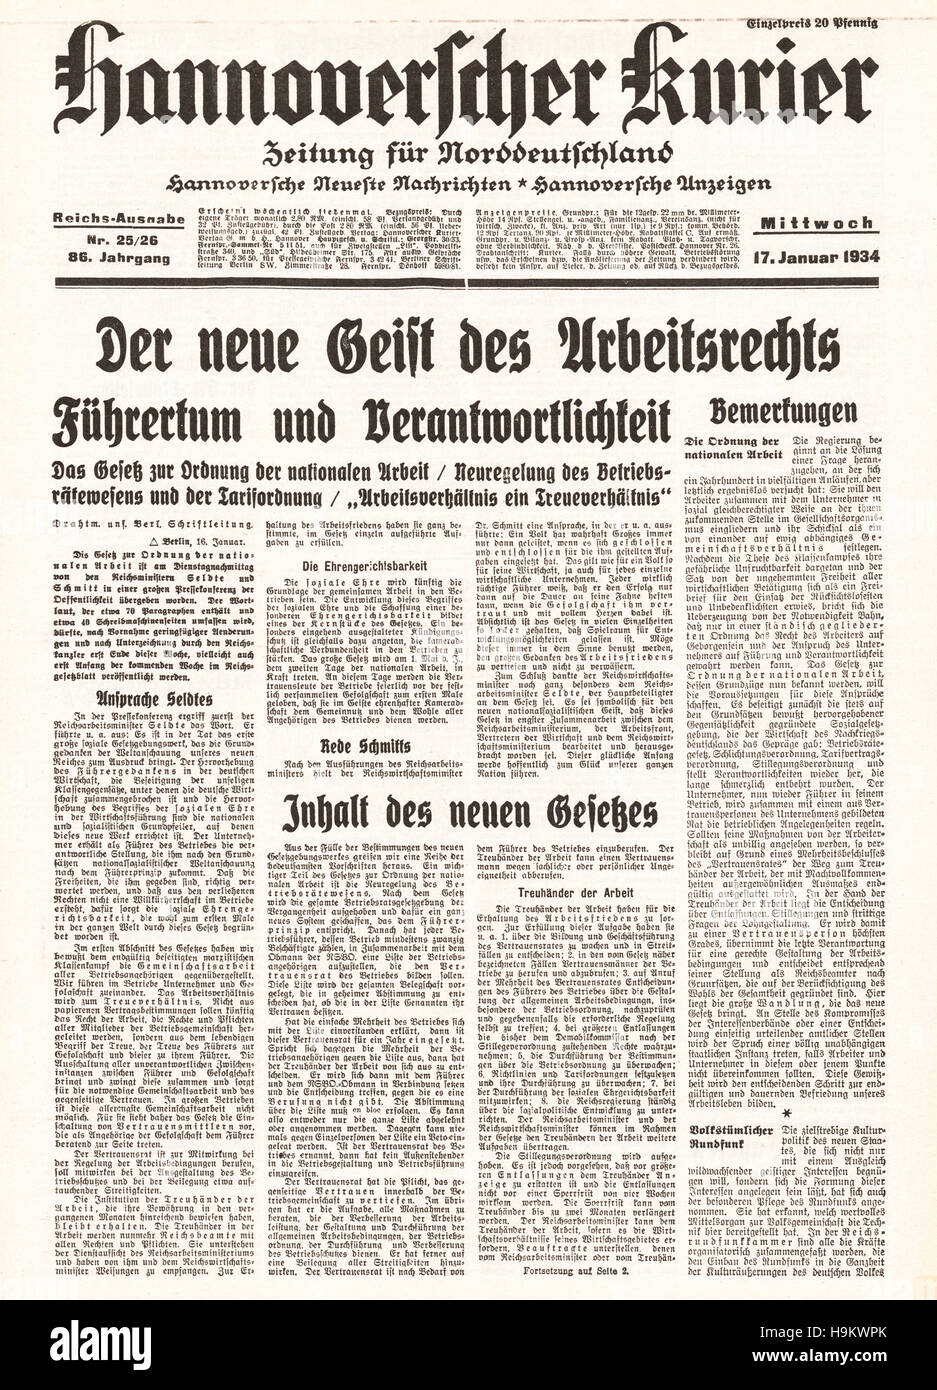 1934 Hannovischer Kurier front page  New labour laws Stock Photo